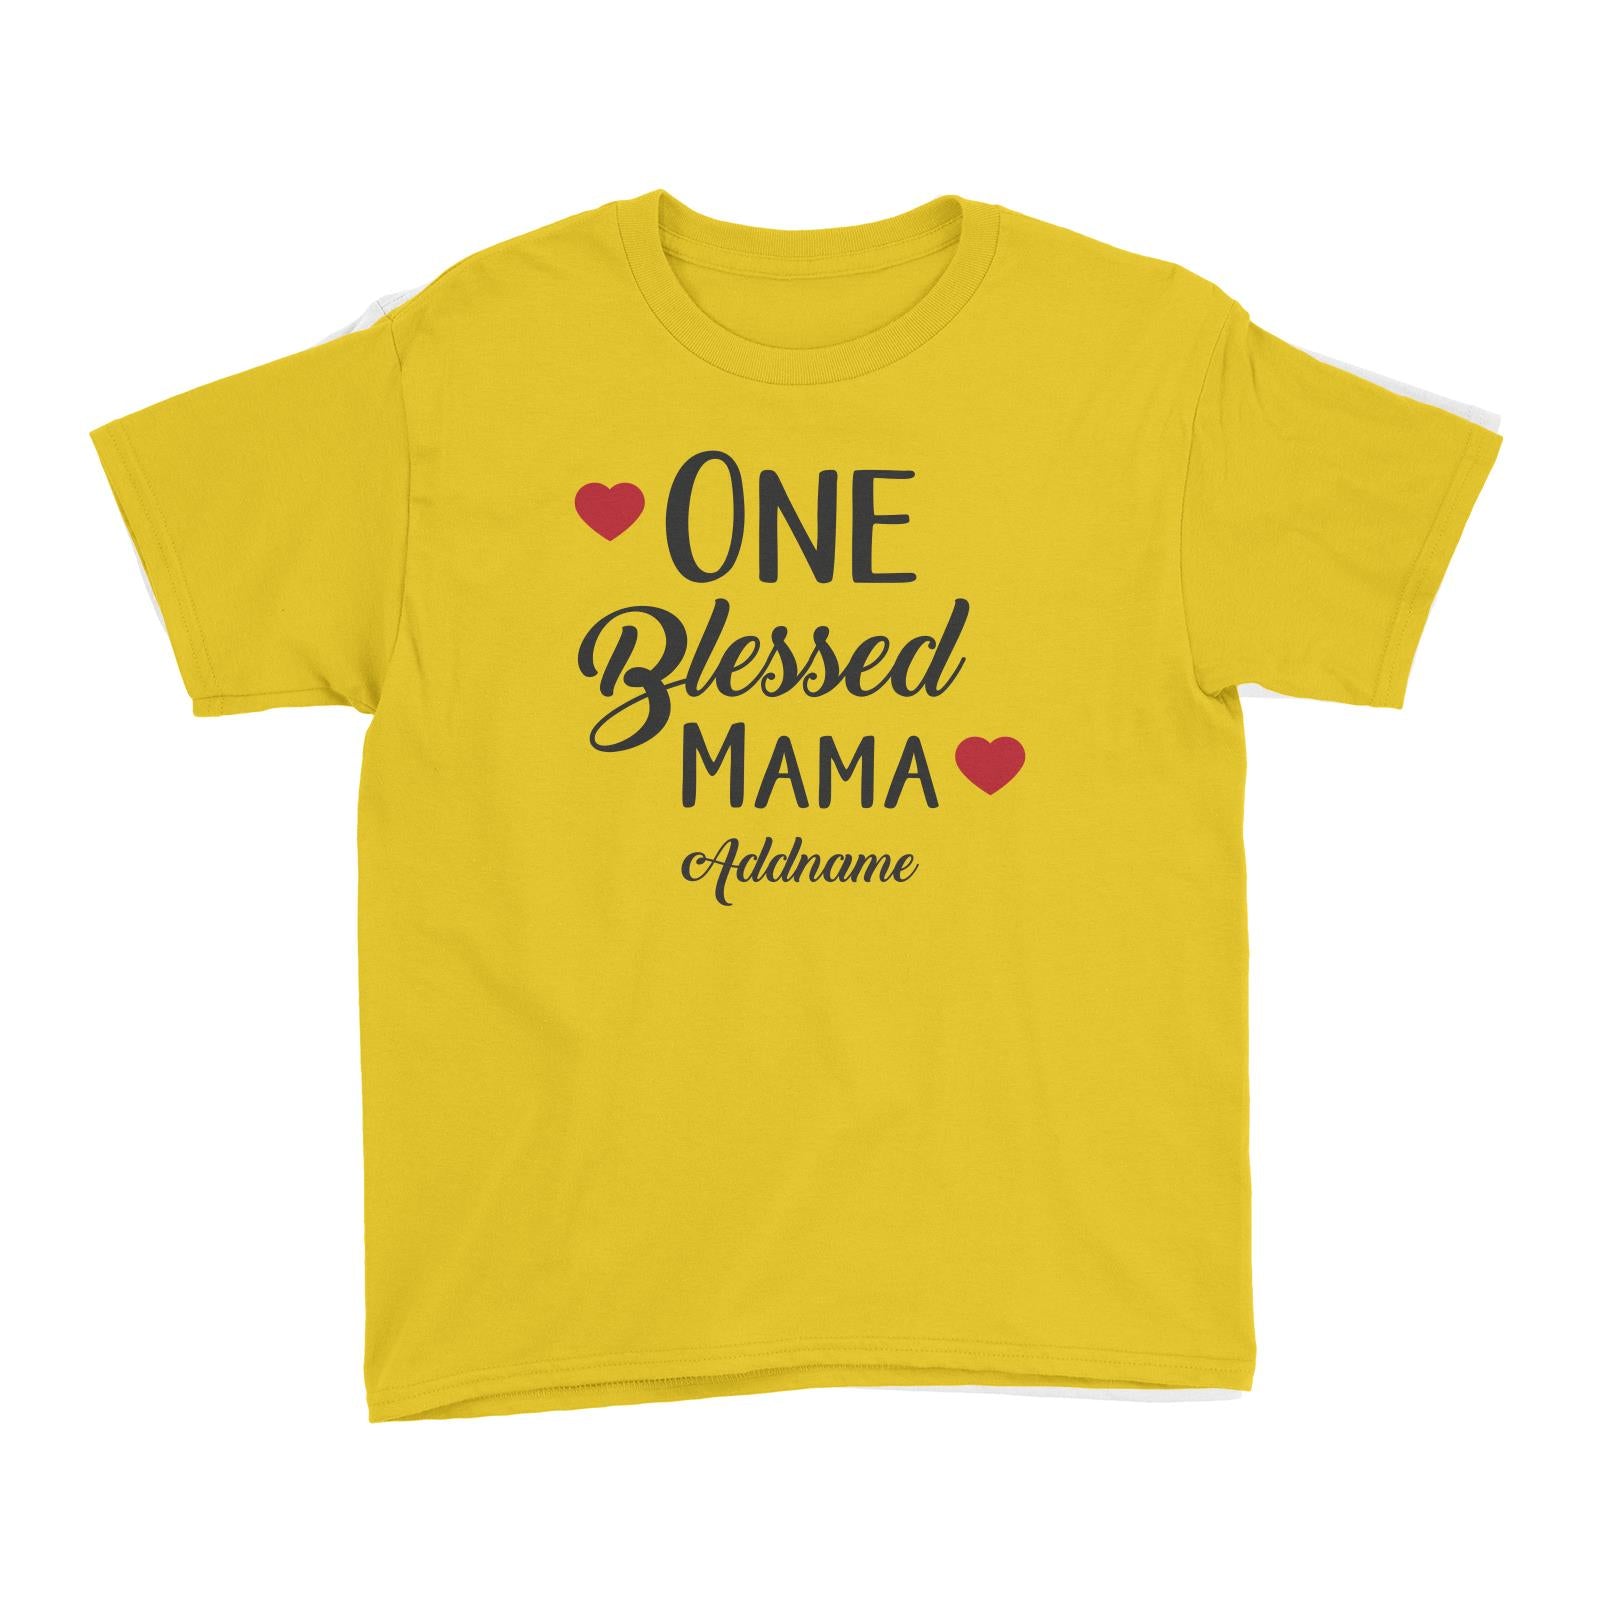 Christian Series One Blessed Mama Addname Kid's T-Shirt